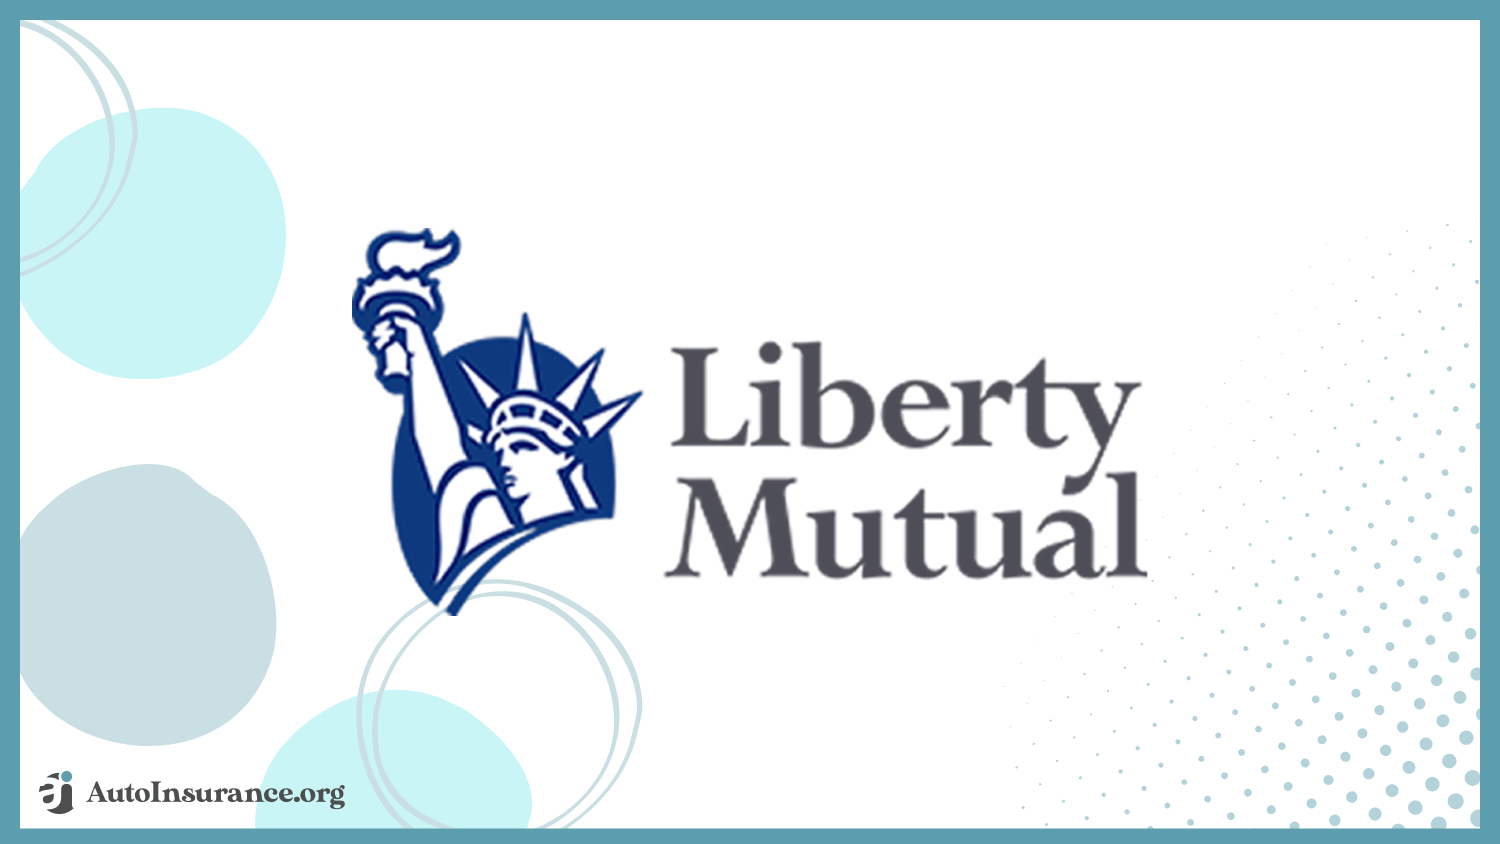 auto insurance companies with the best customer service: Liberty Mutual